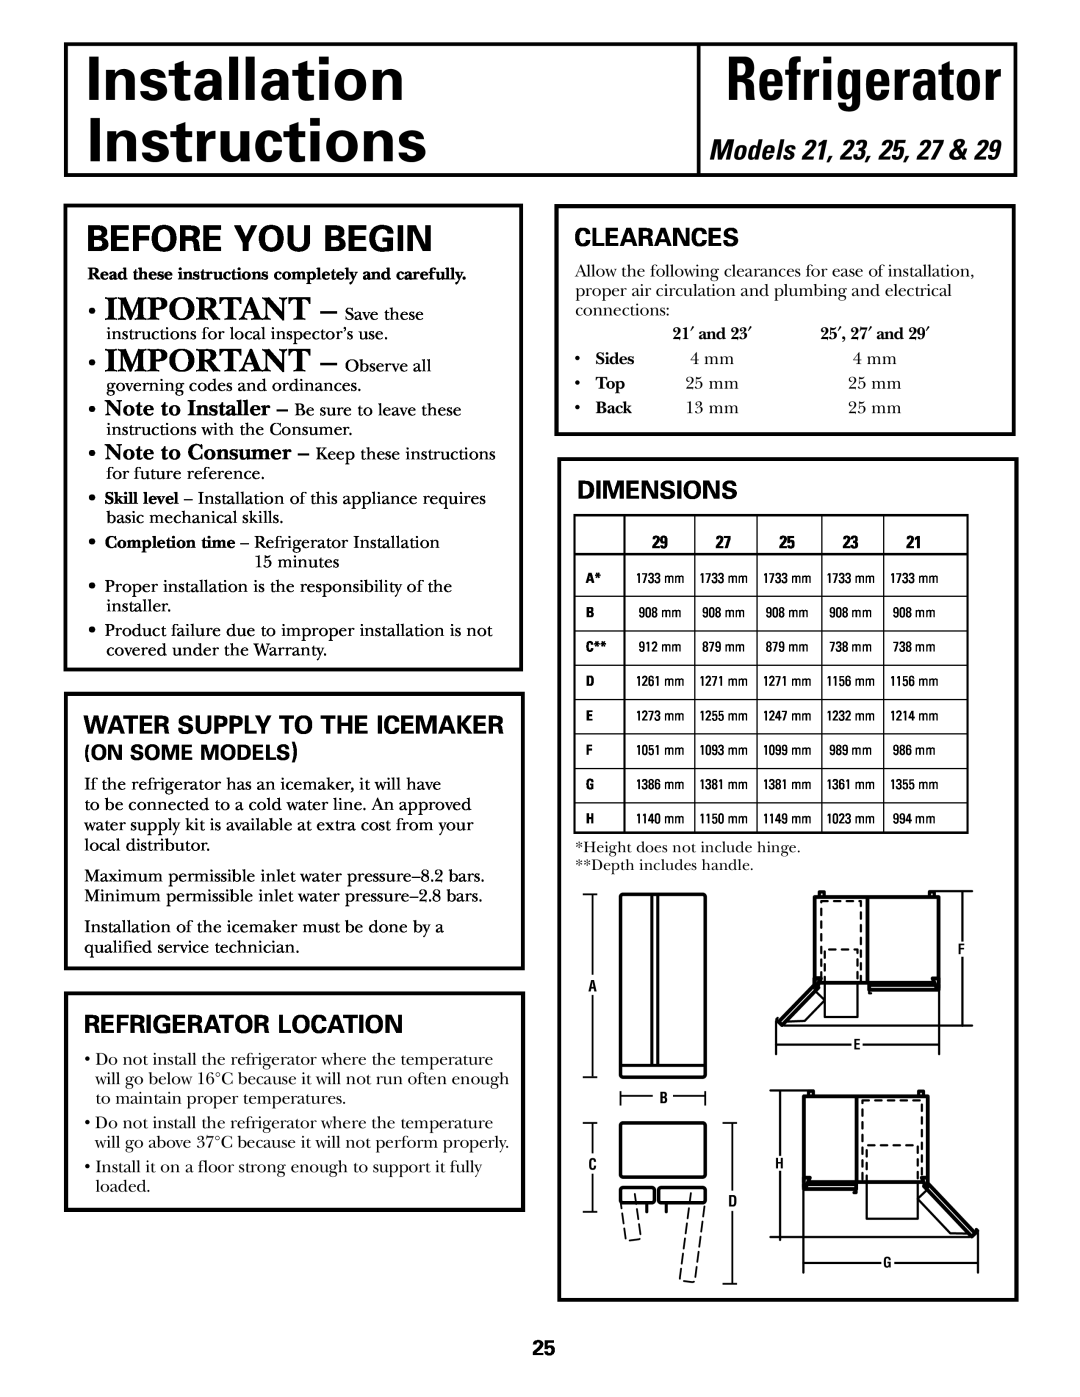 GE 21, 23, 25, 27, 29 Installation Instructions, Refrigerator, Before You Begin, IMPORTANT - Save these, Clearances 